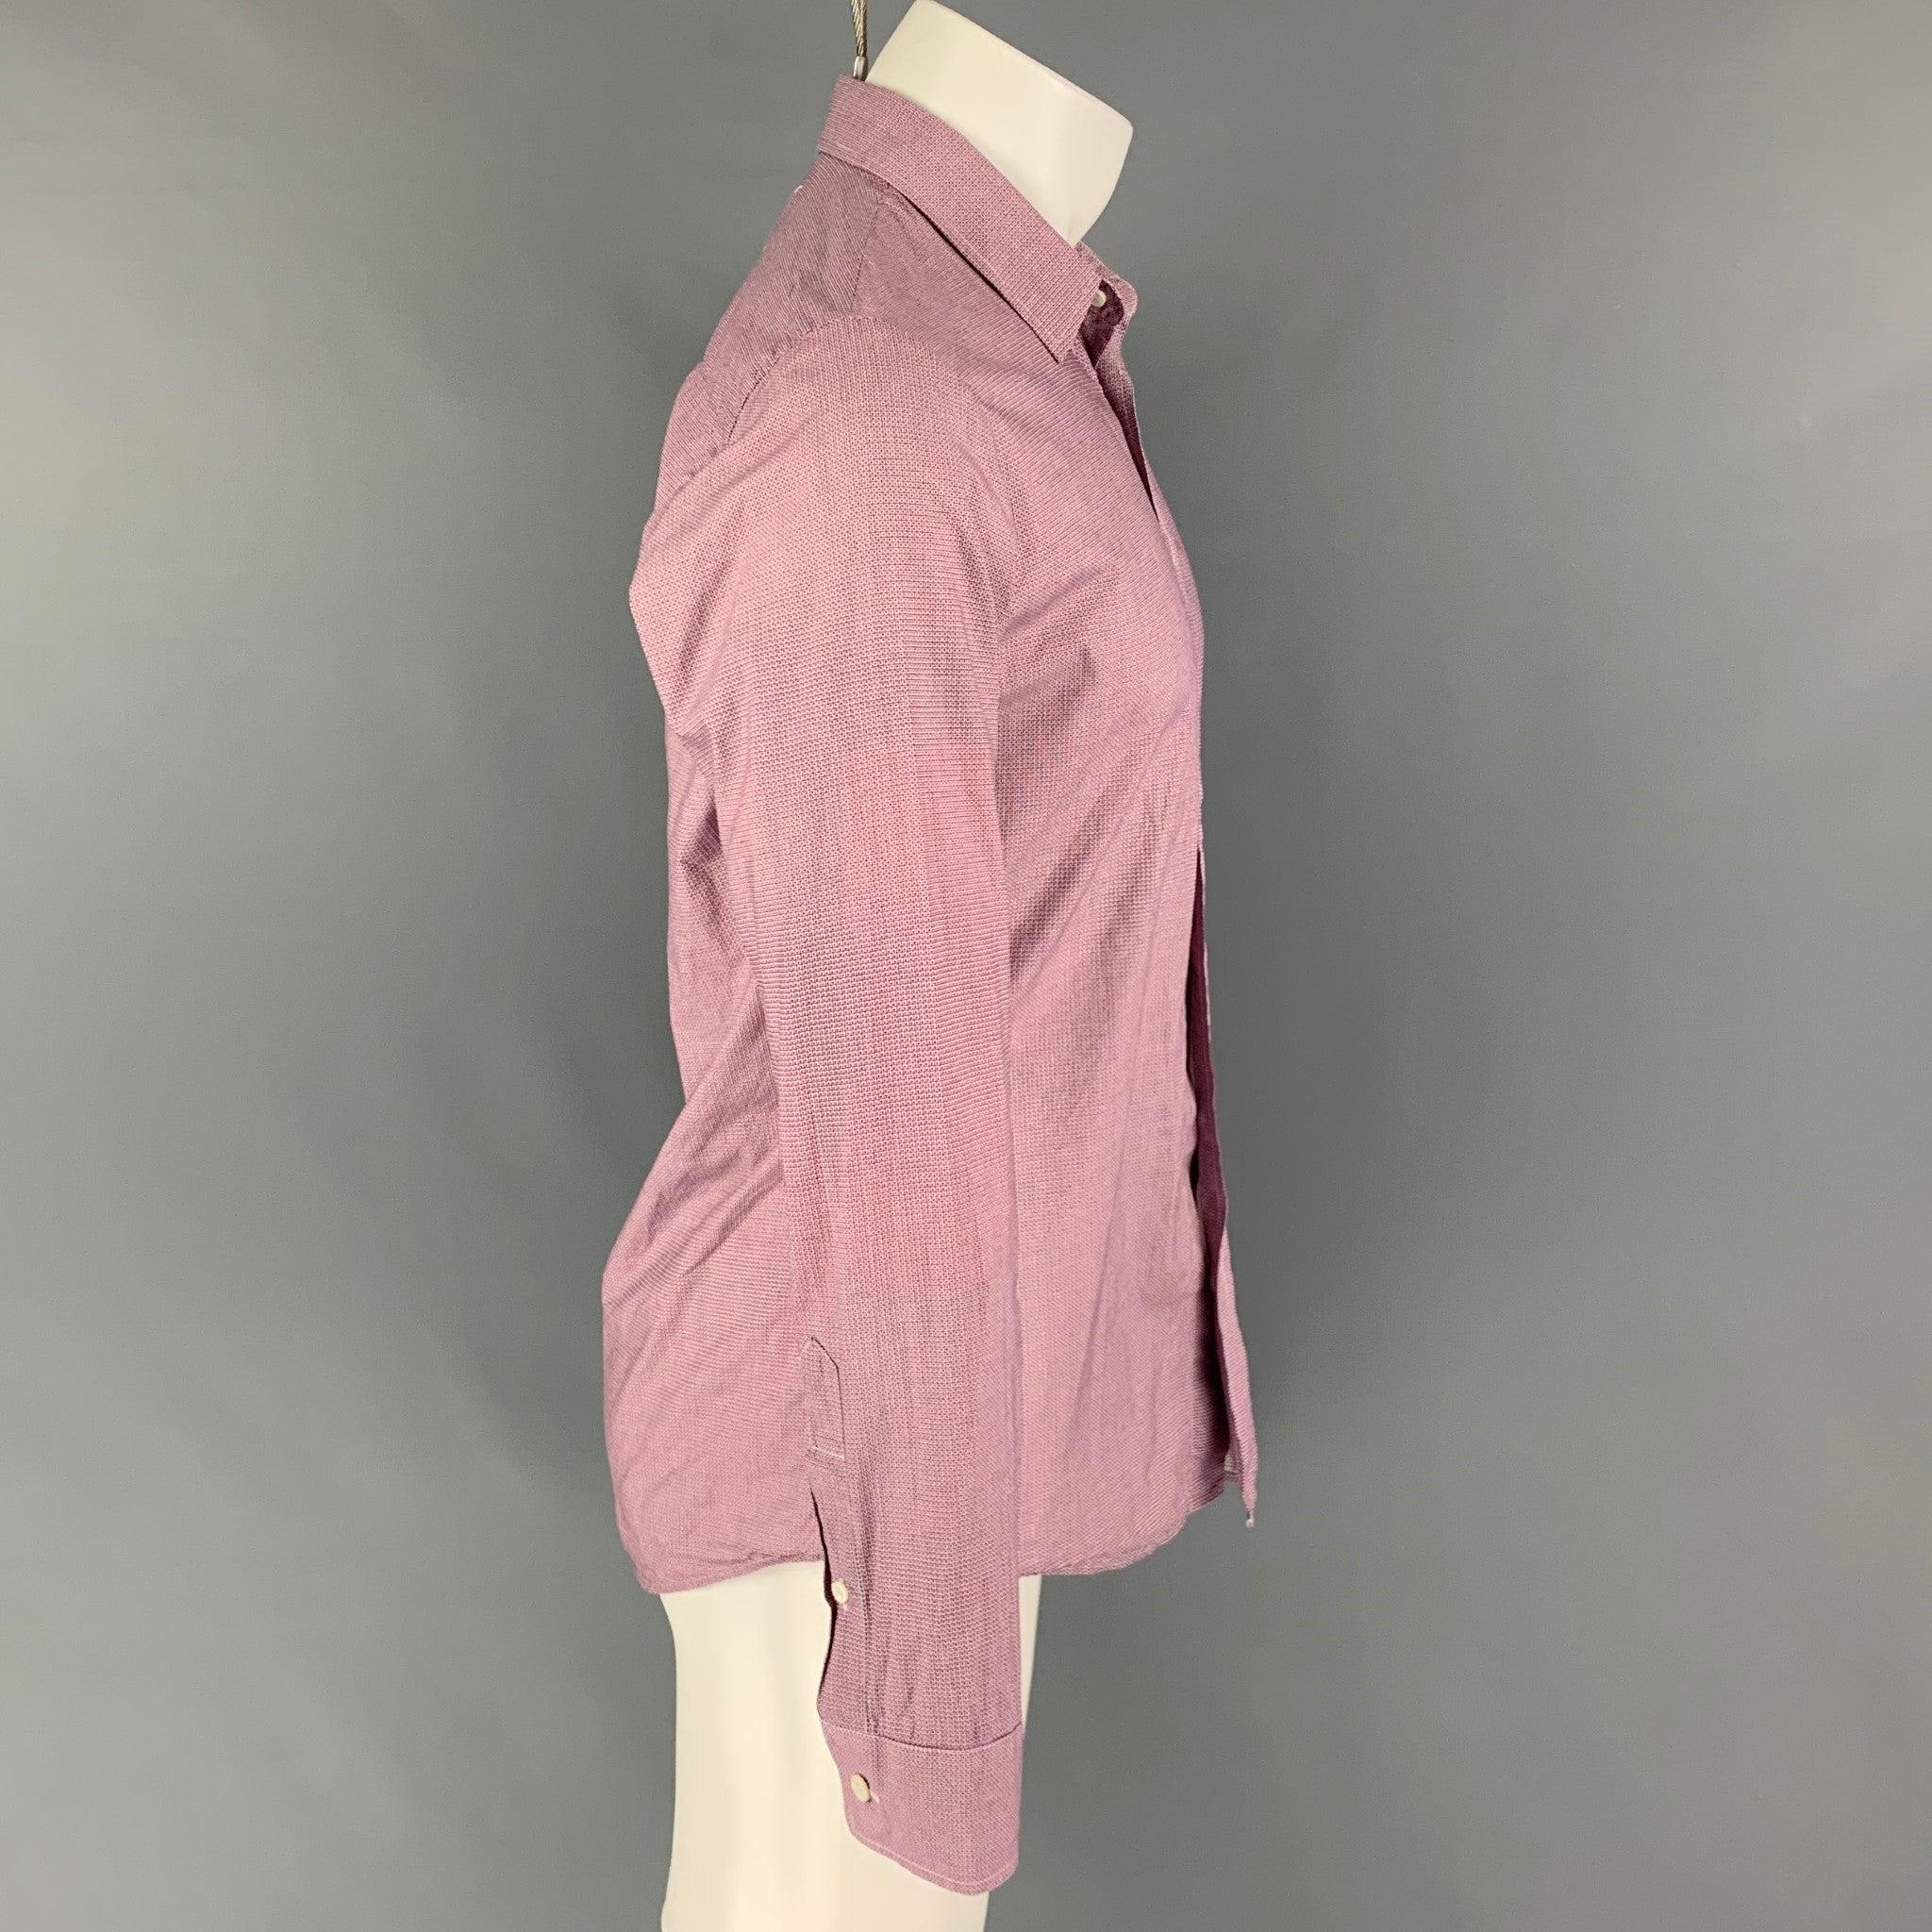 MAISON MARTIN MARGIELA long sleeve shirt comes in a red & white dot print cotton featuring a spread collar and a button up closure. Made in Romania.Very Good
Pre-Owned Condition. 

Marked:   46 

Measurements: 
 
Shoulder: 16.5 inches  Chest: 38